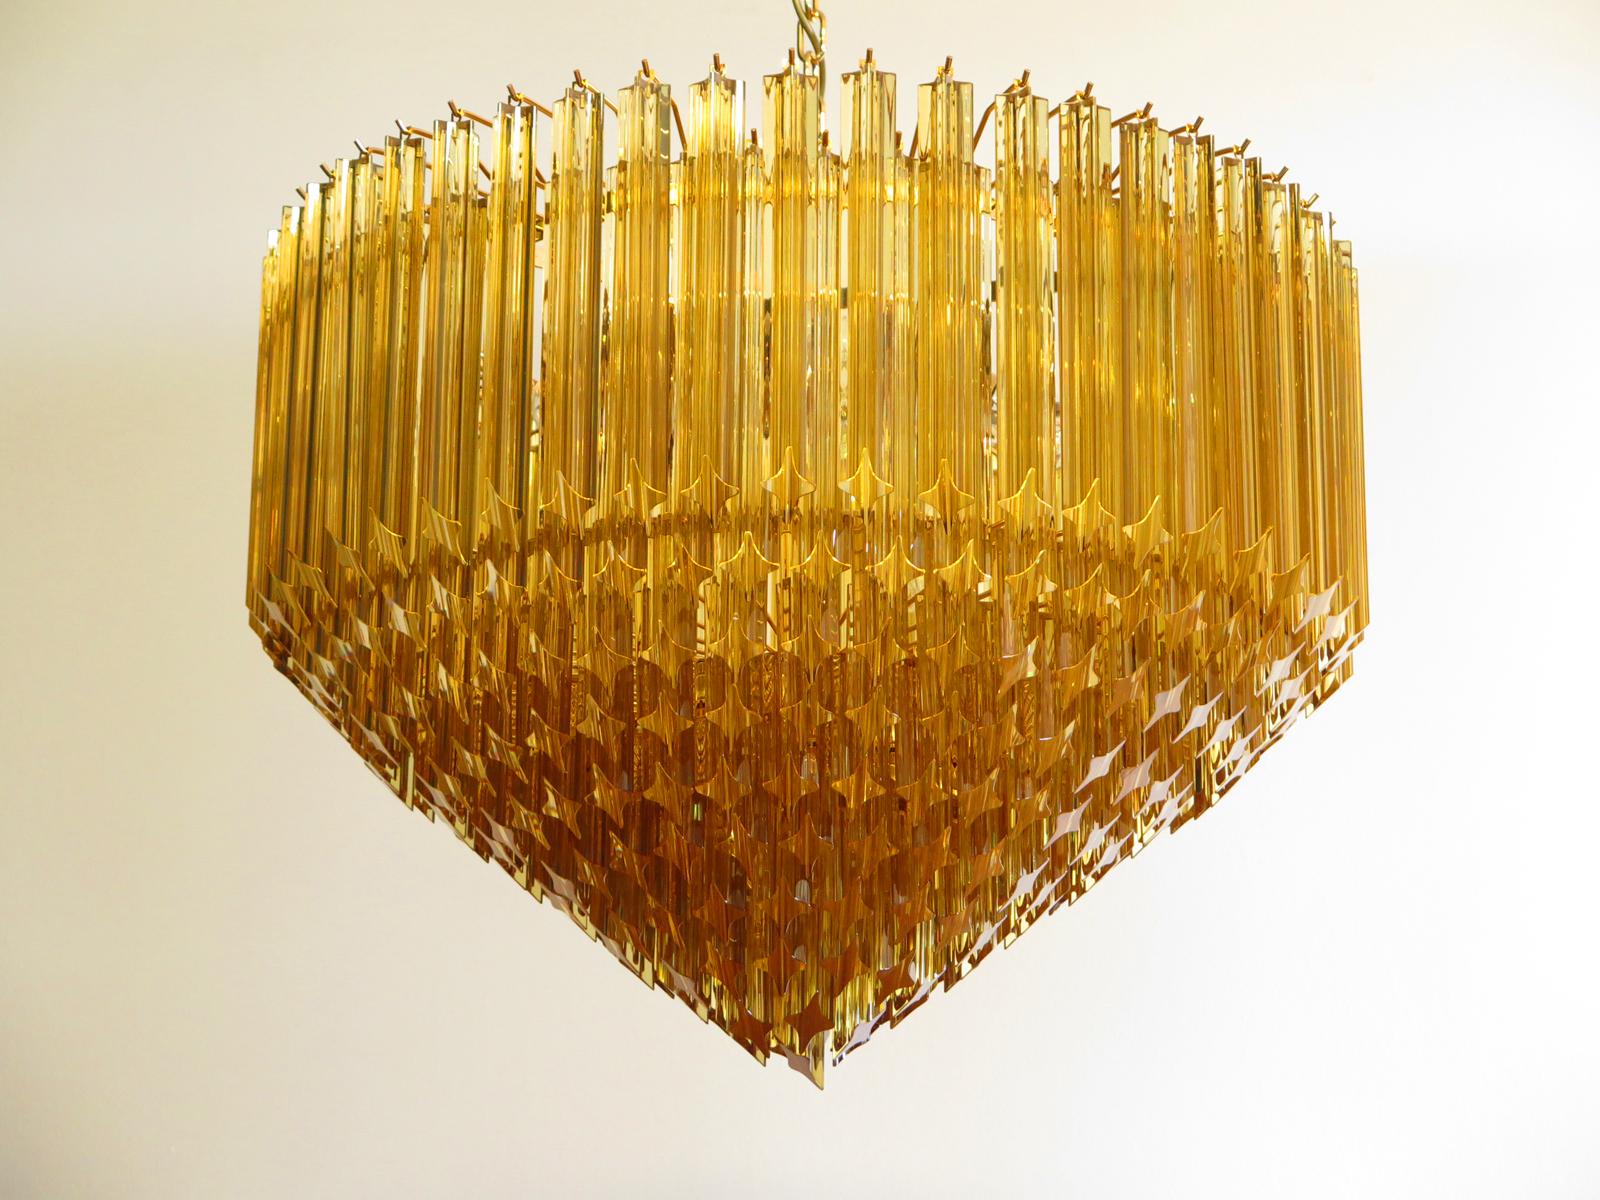 A magnificent Trio of Murano glass chandeliers, 265 amber quadriedri on gold frame. This large midcentury Italian chandelier is truly a timeless Classic. 
Dimensions: 57.10 inches (145 cm) height with chain; 25.60 inches (65 cm) height without